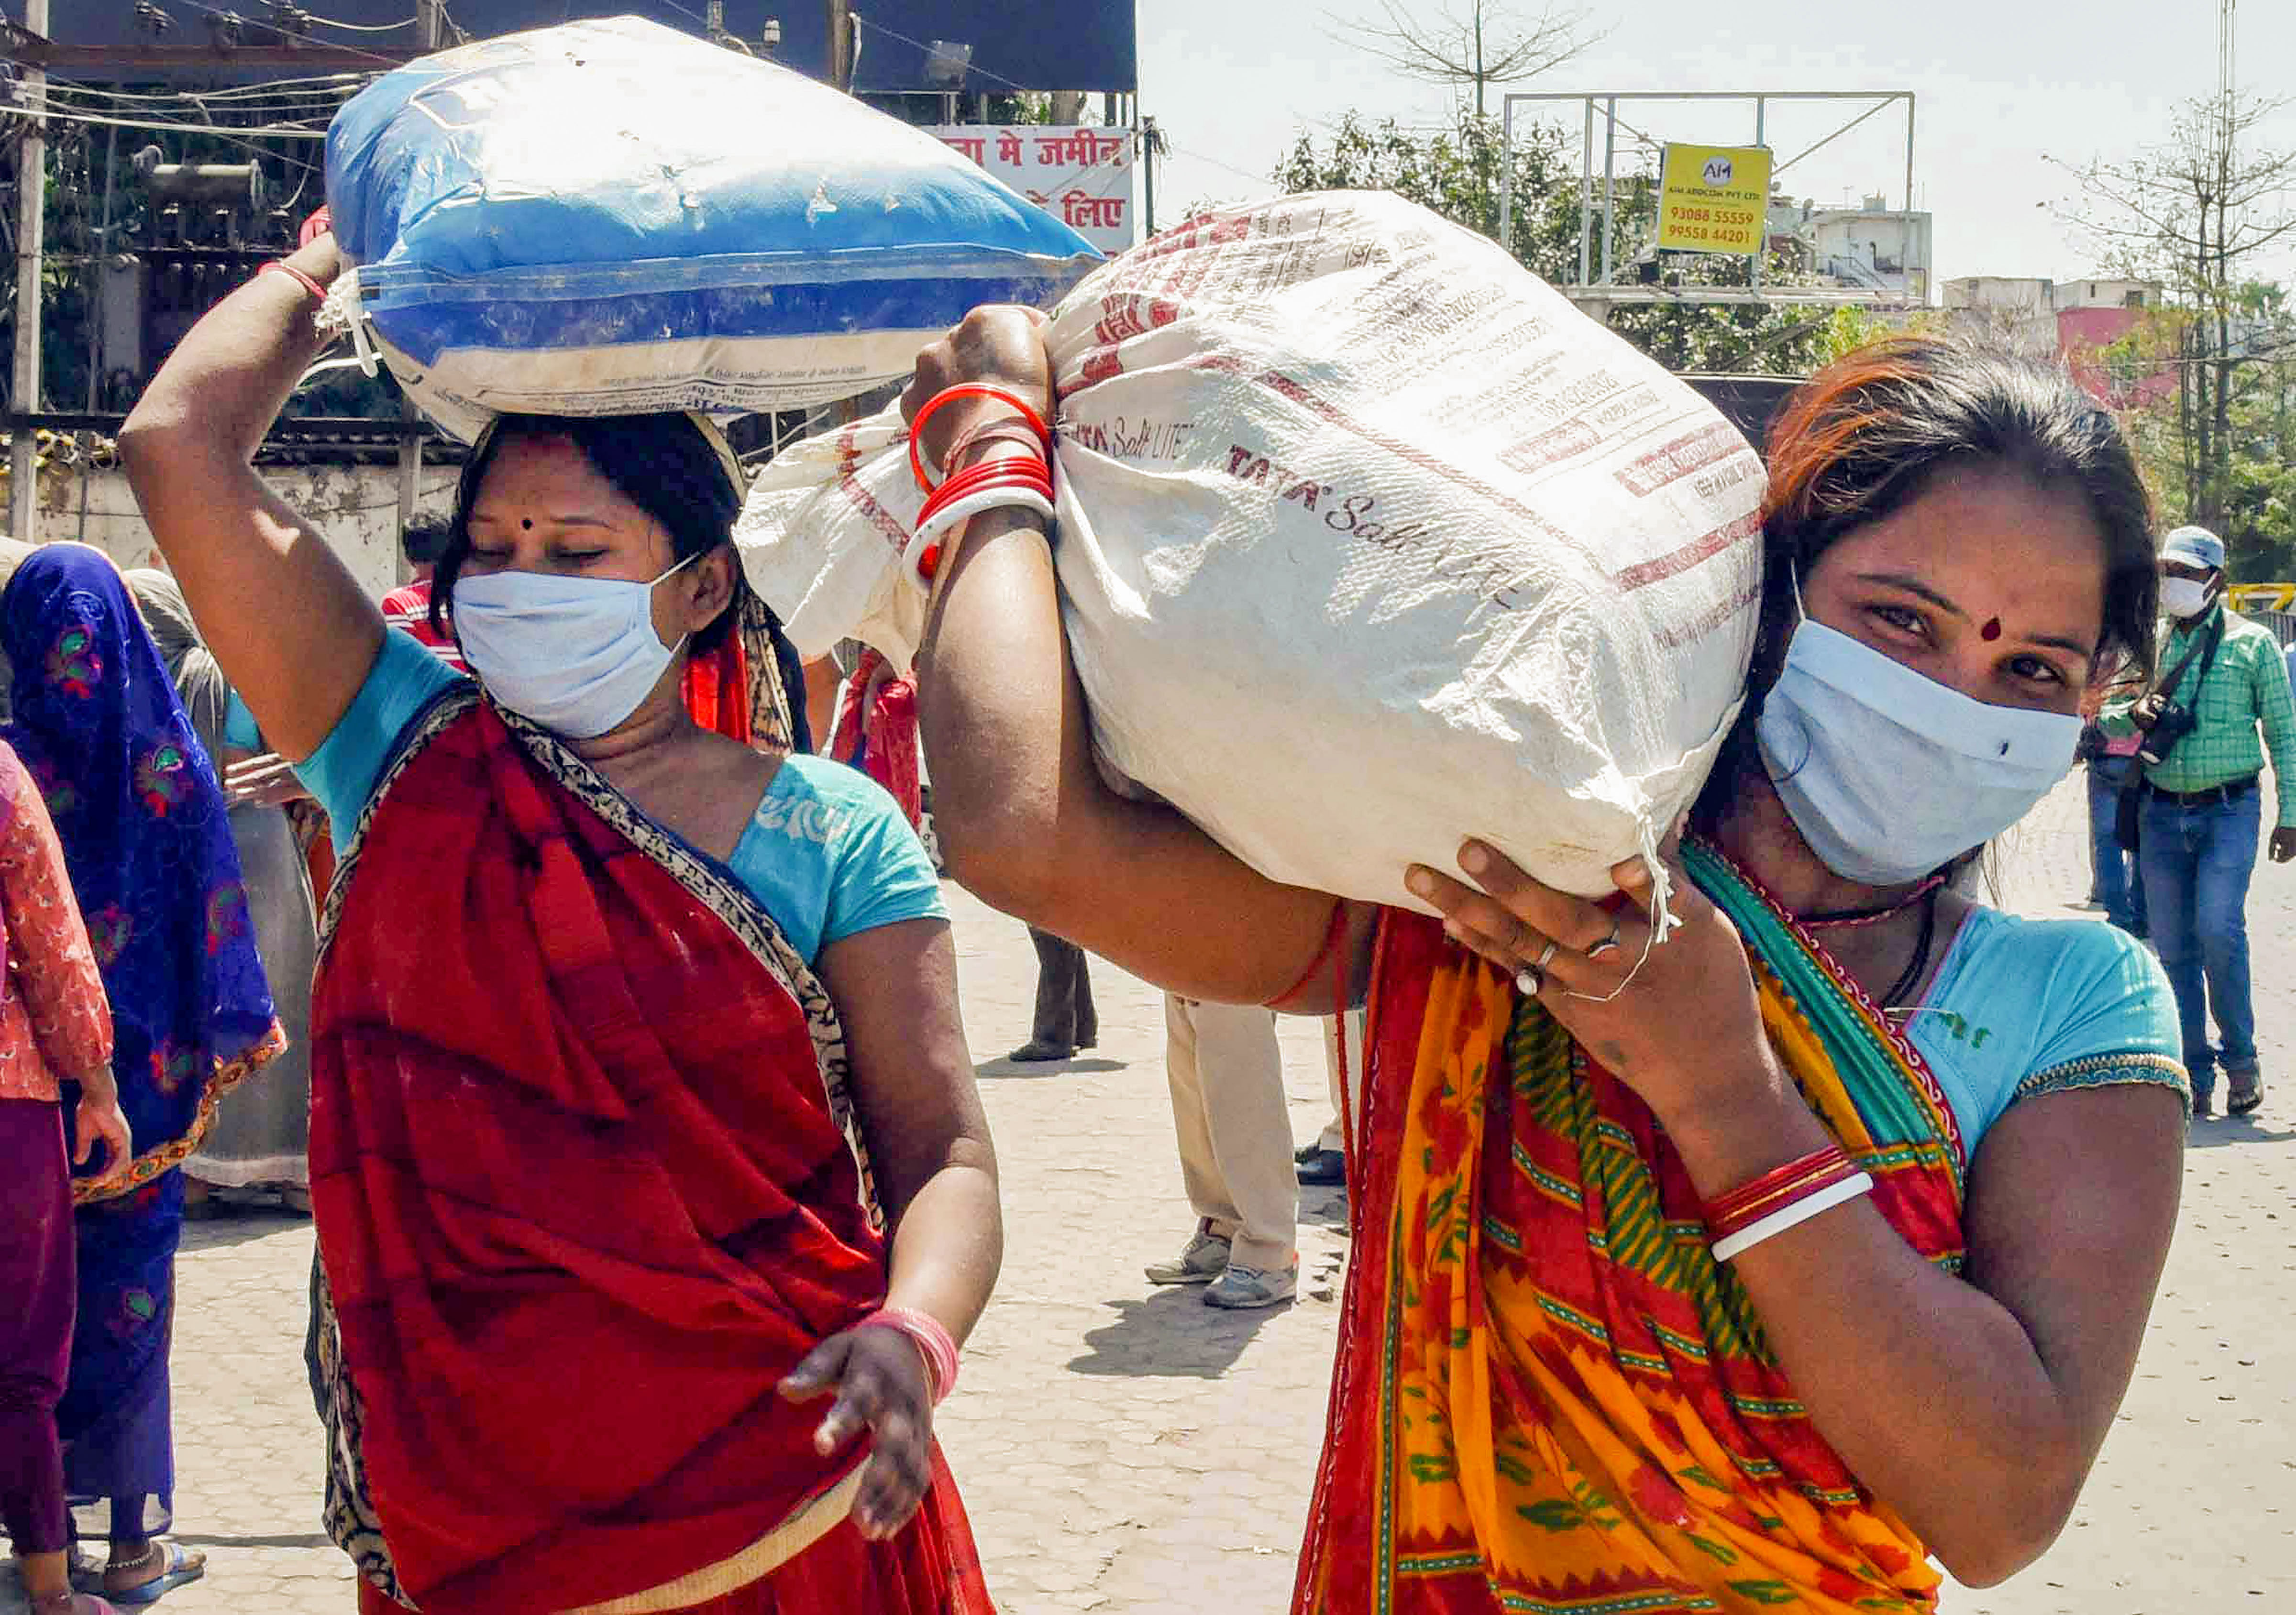 Patna: Needy people wearing protective masks carry relief material given by the security personnel during the nationwide lockdown imposed in the wake of coronavirus pandemic. (Credit: PTI)